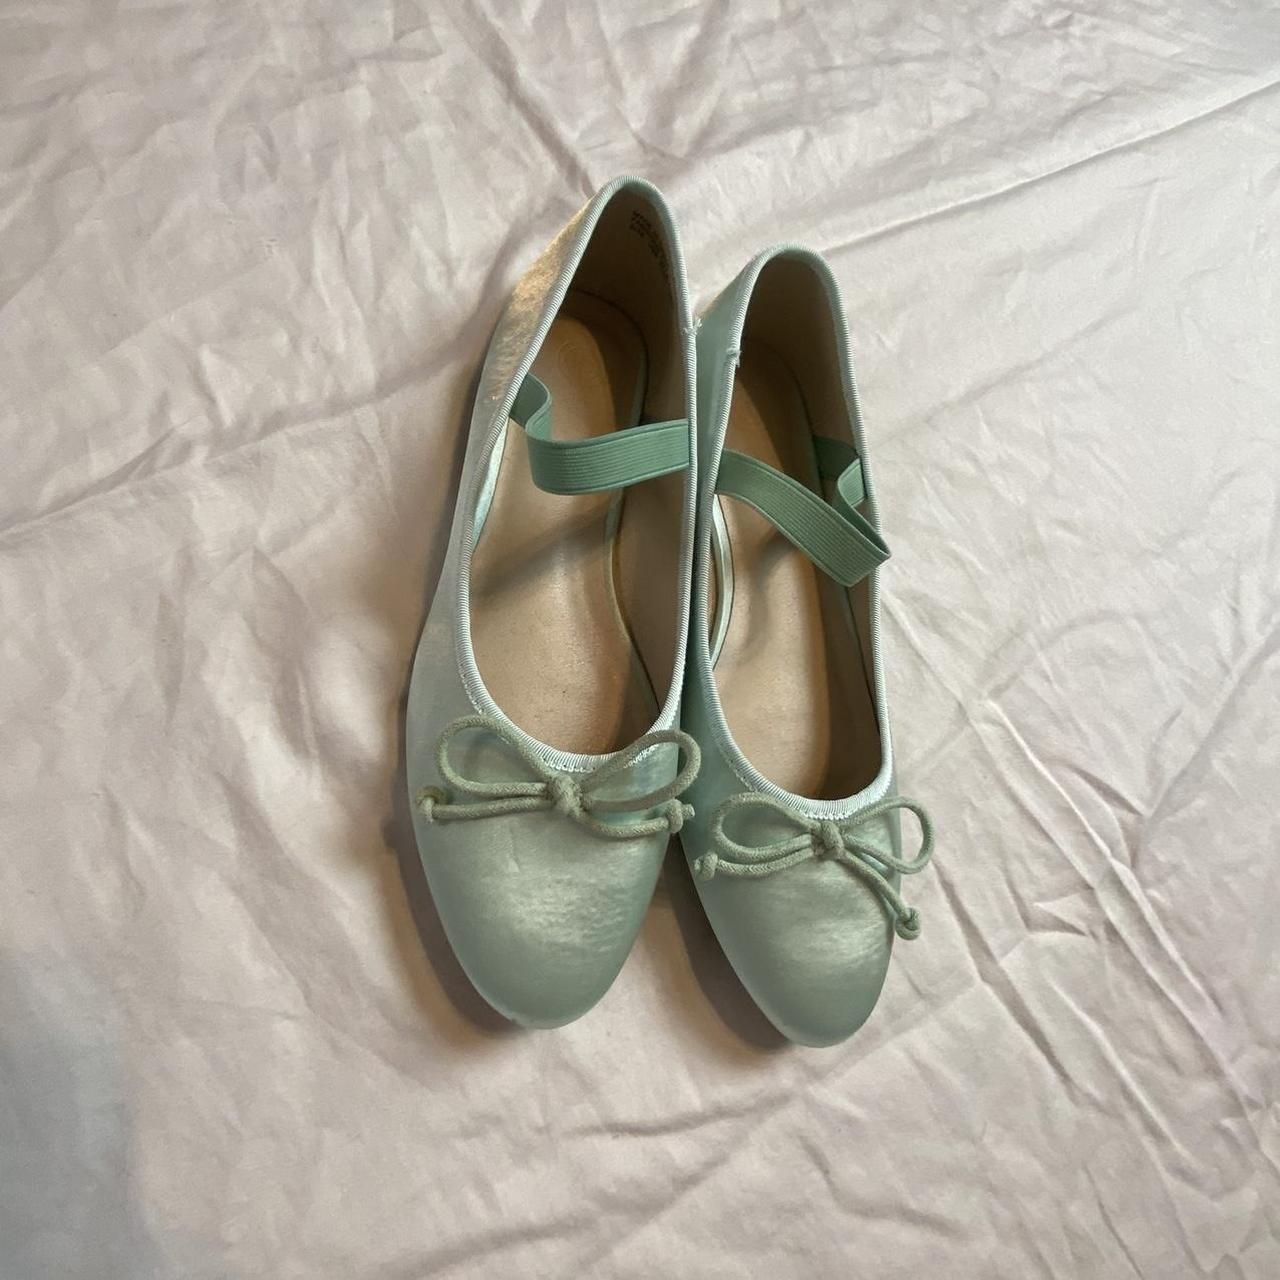 Urban Outfitters Women's Ballet-shoes (2)